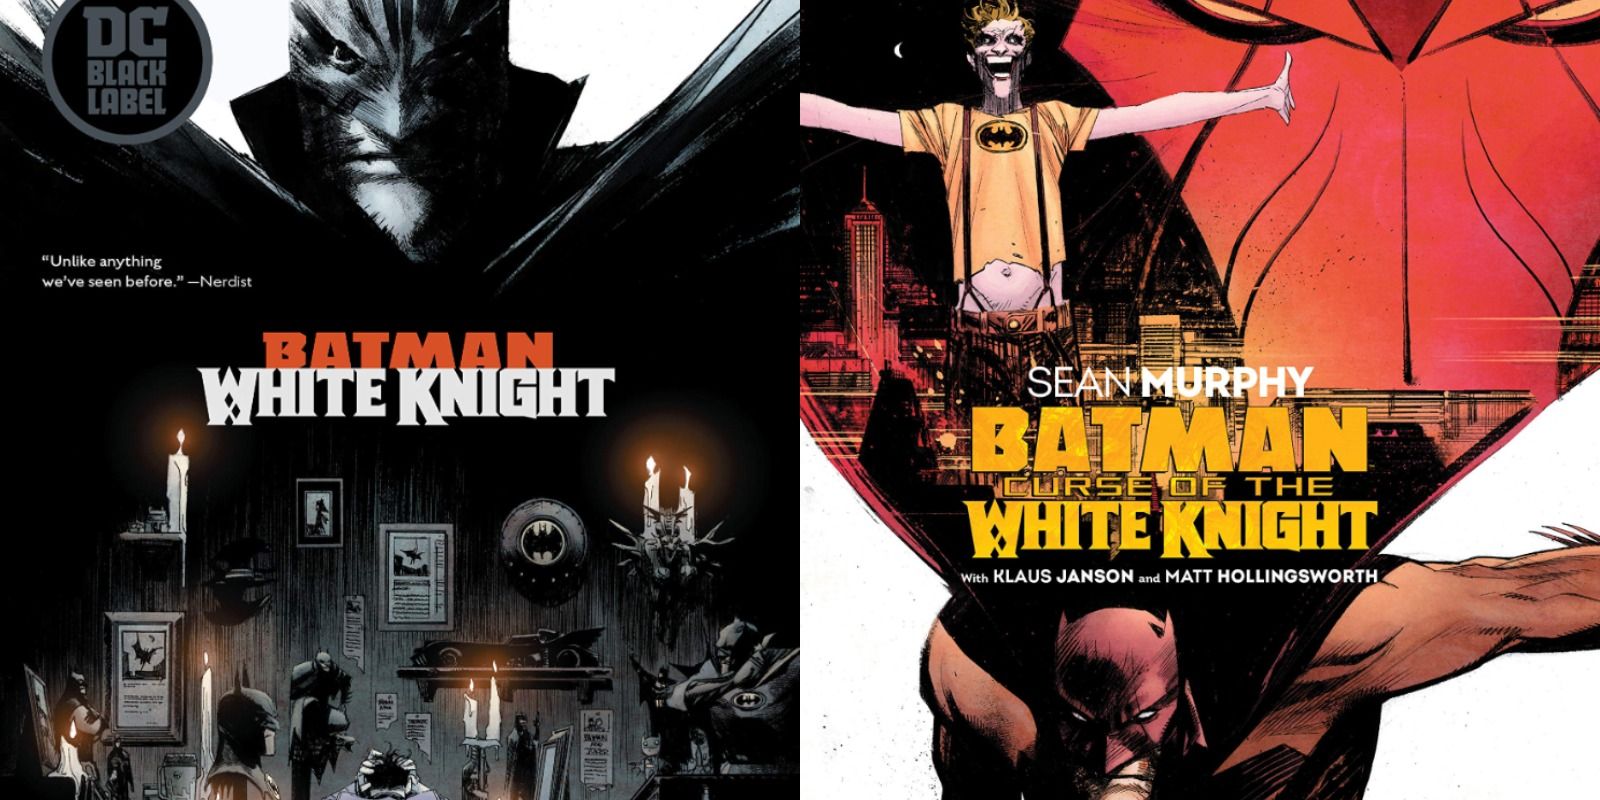 Cover art for Sean Murphy's Batman: White Knight and Curse of the White Knight